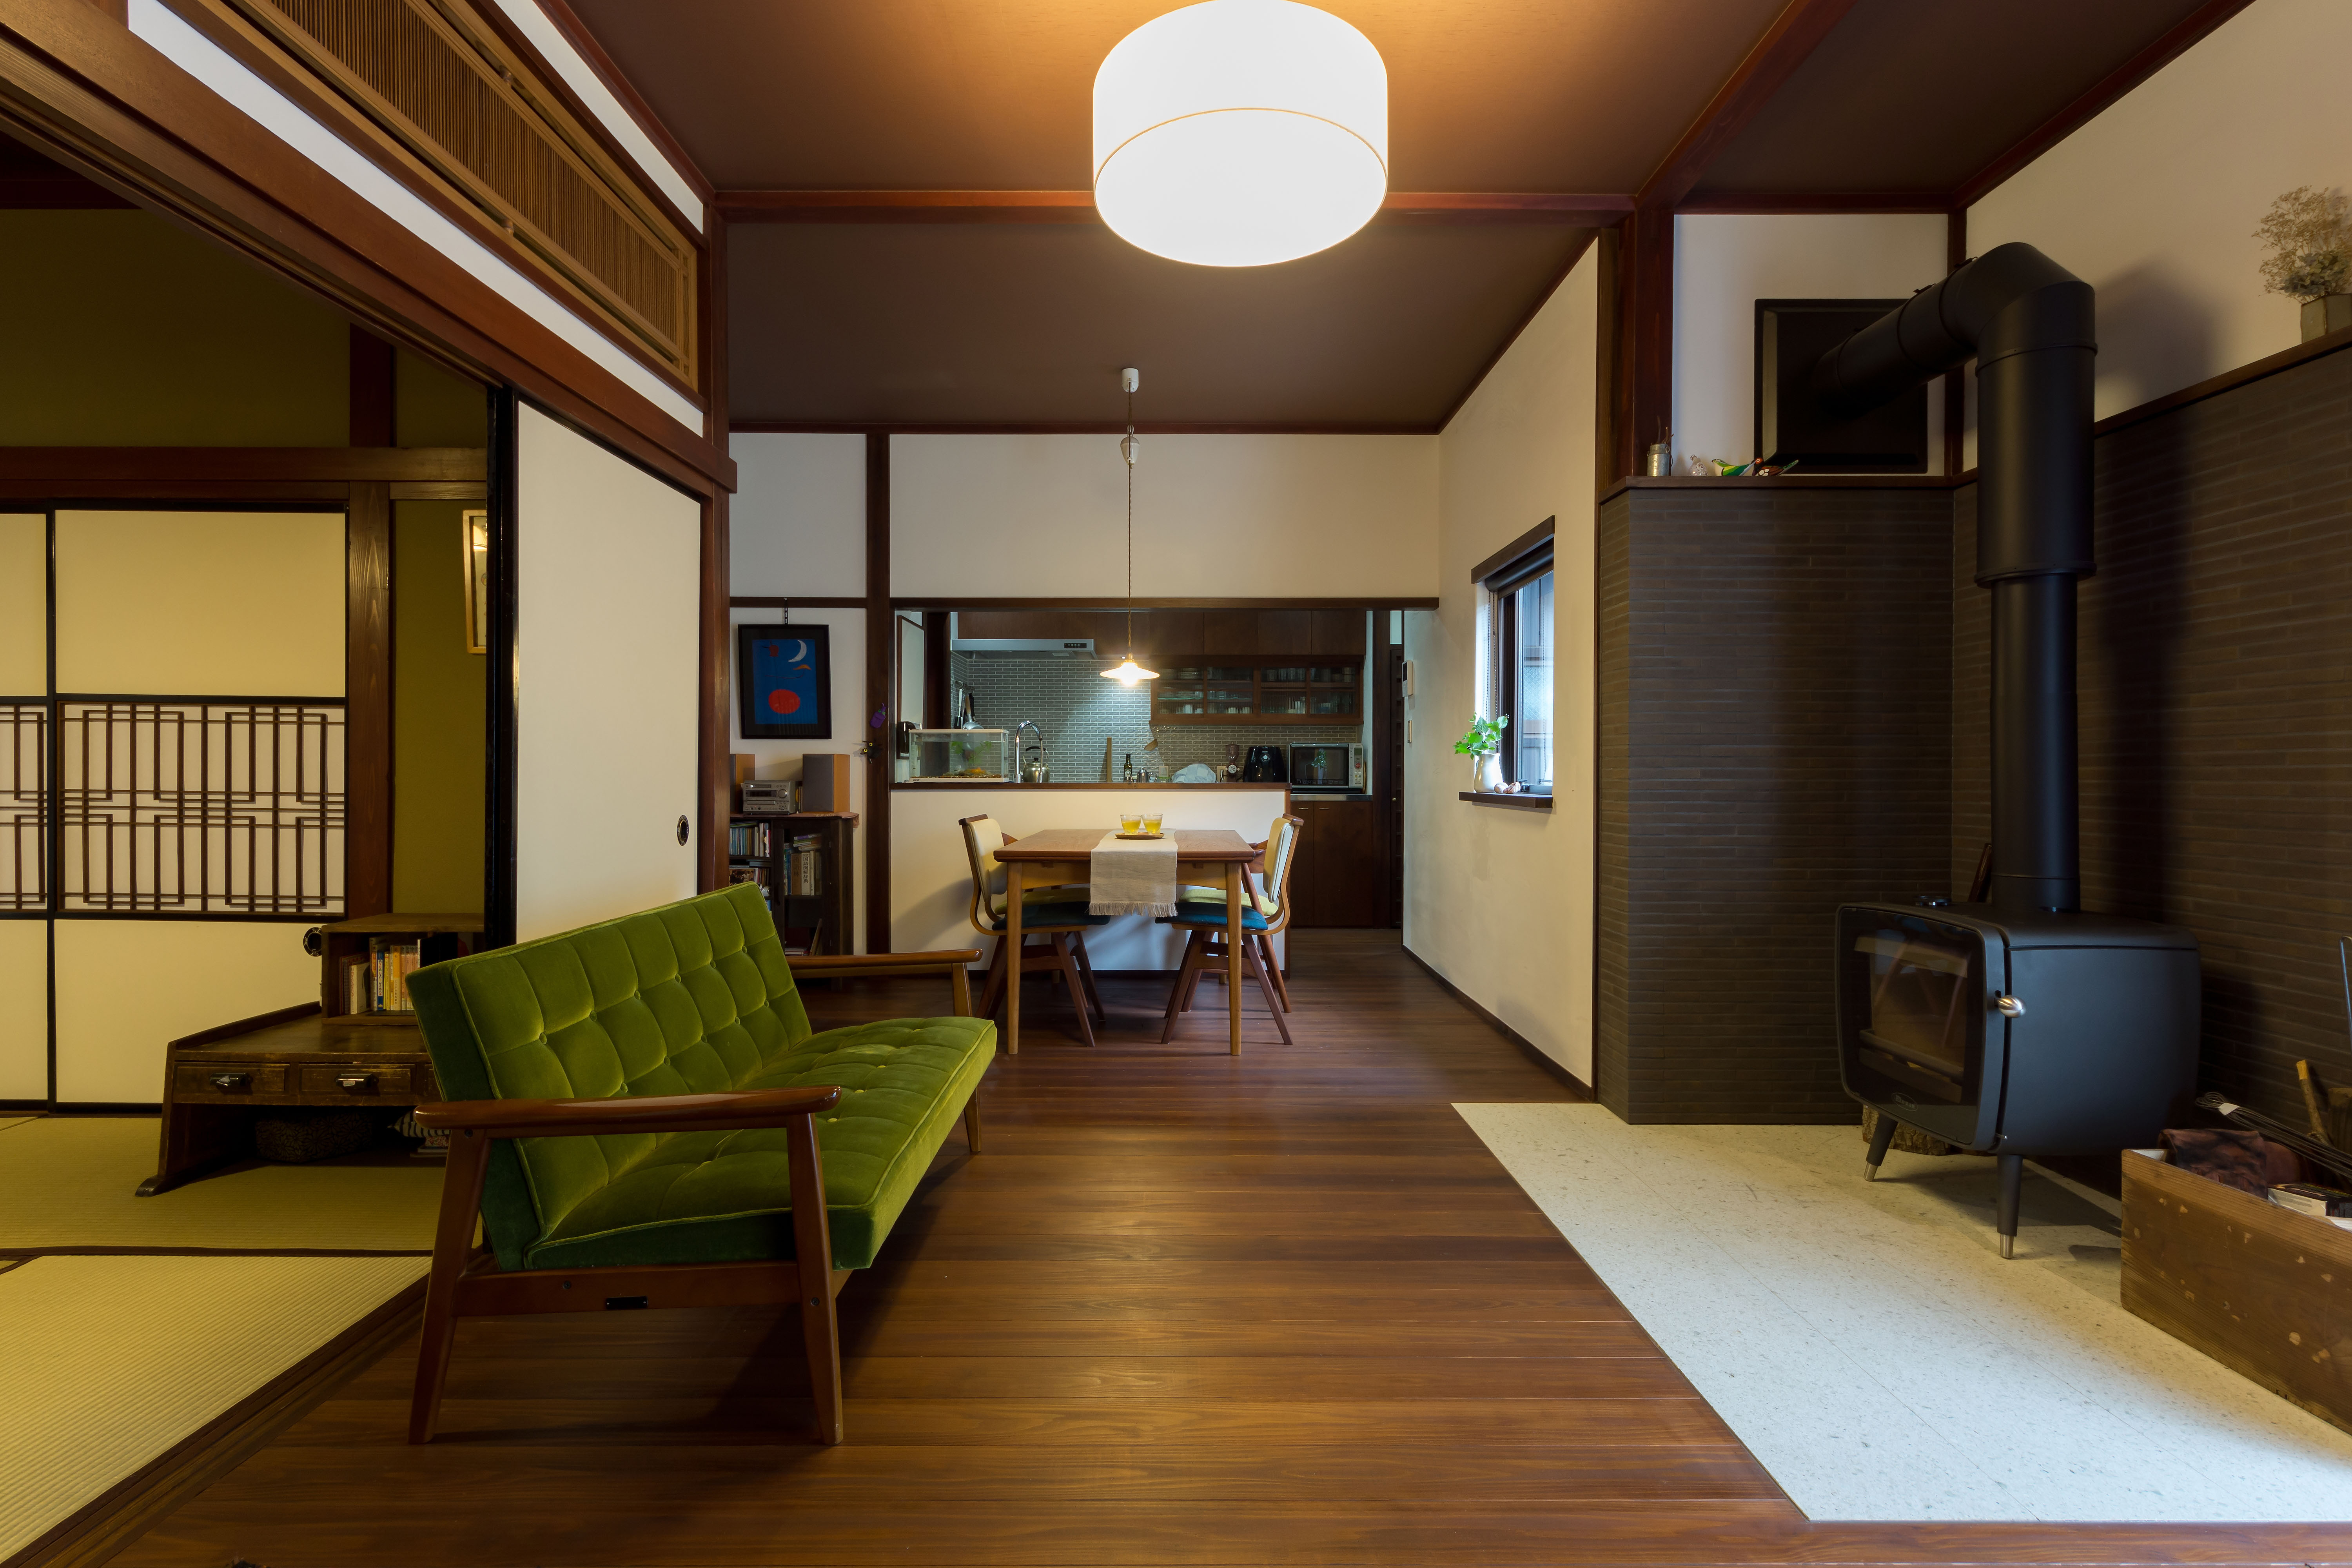 Home sweet home: Preserving the traditional Kanazawa townhouse | The